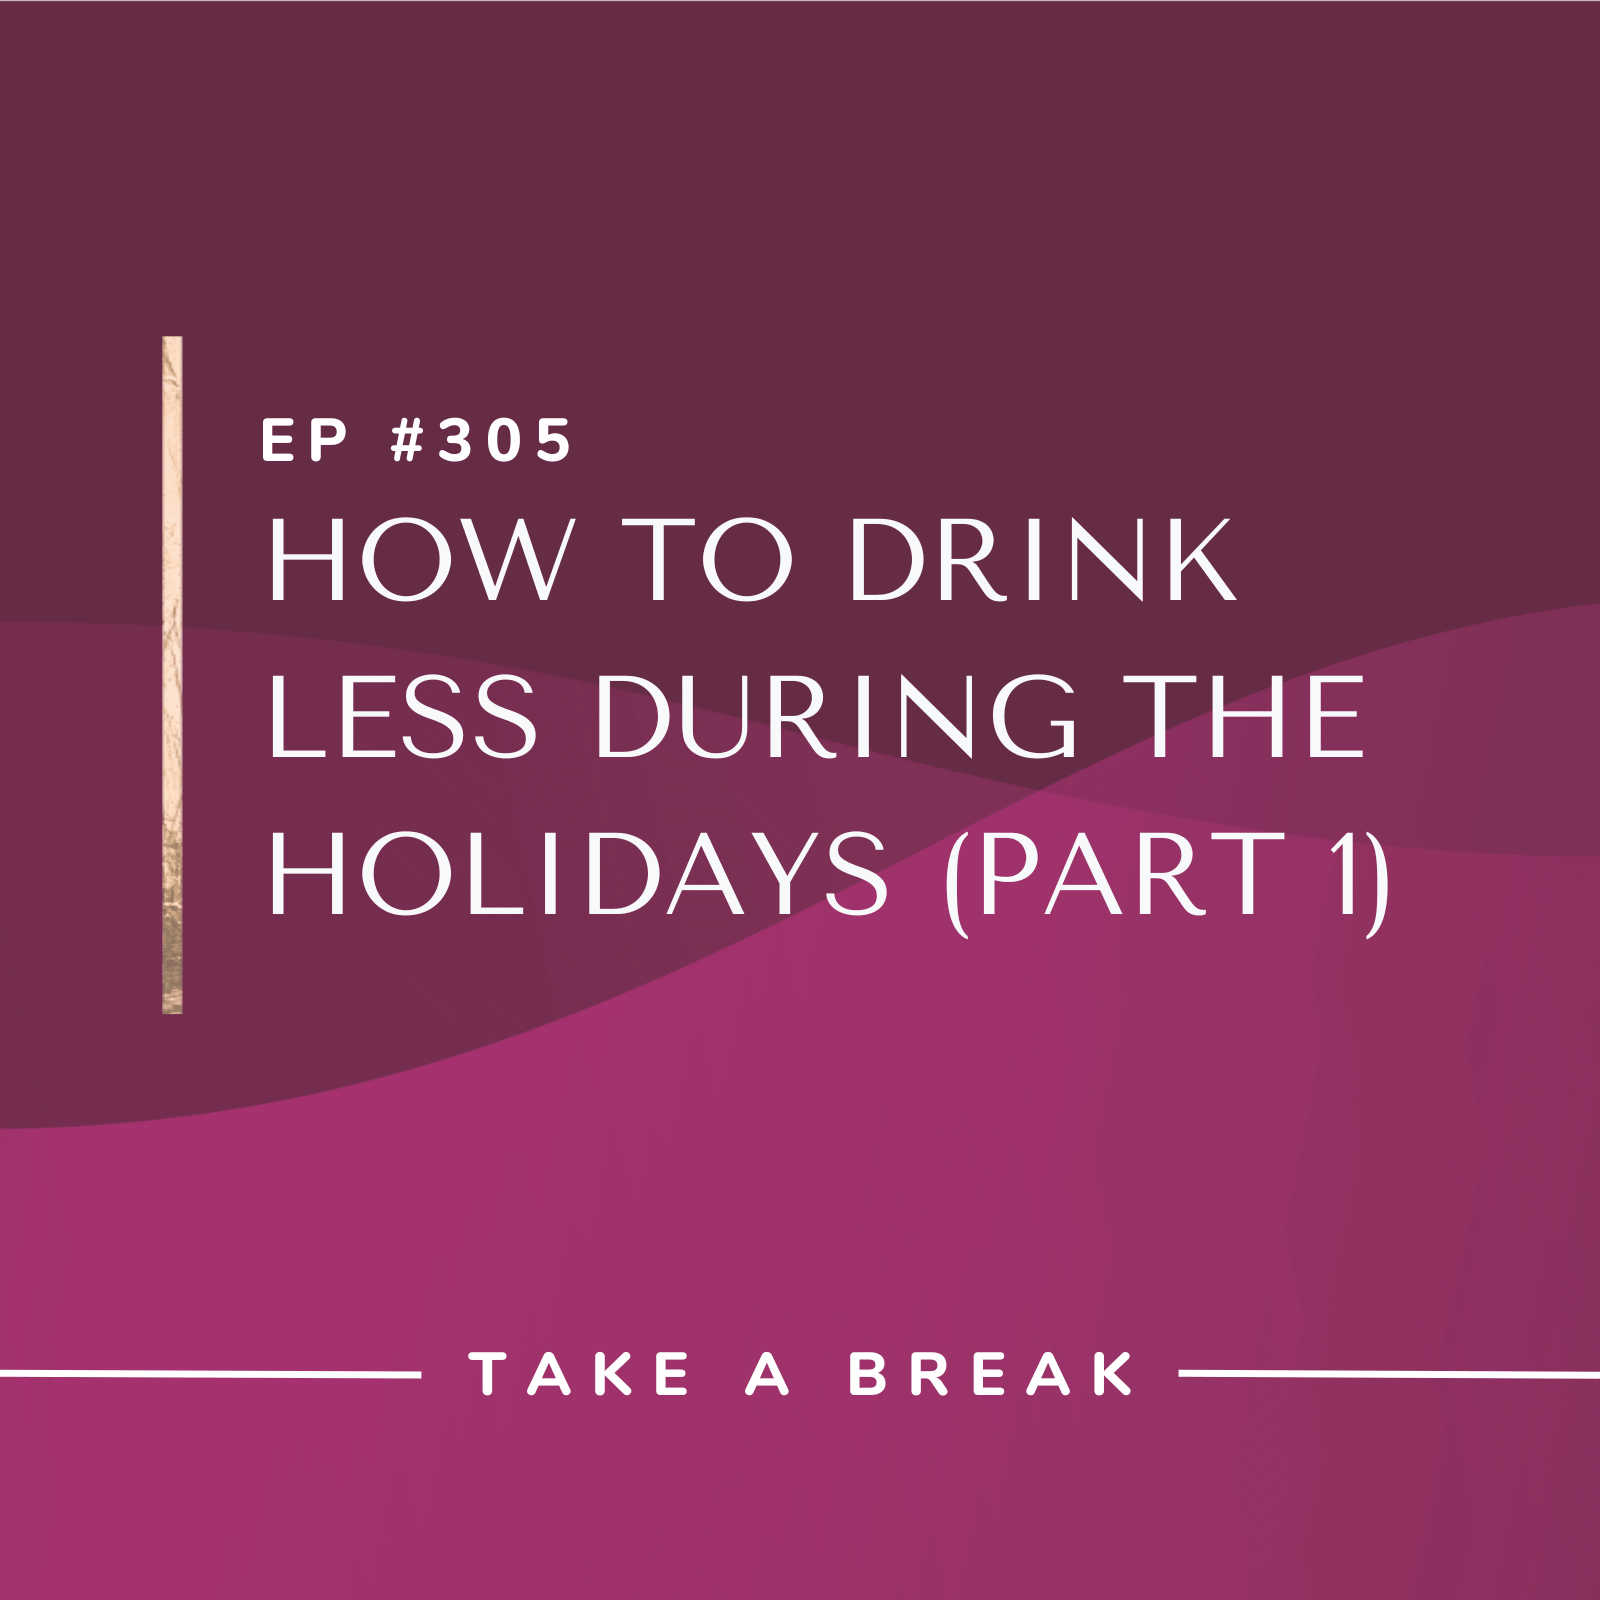 Take A Break from Drinking with Rachel Hart | How to Drink Less During the Holidays (Part 1)